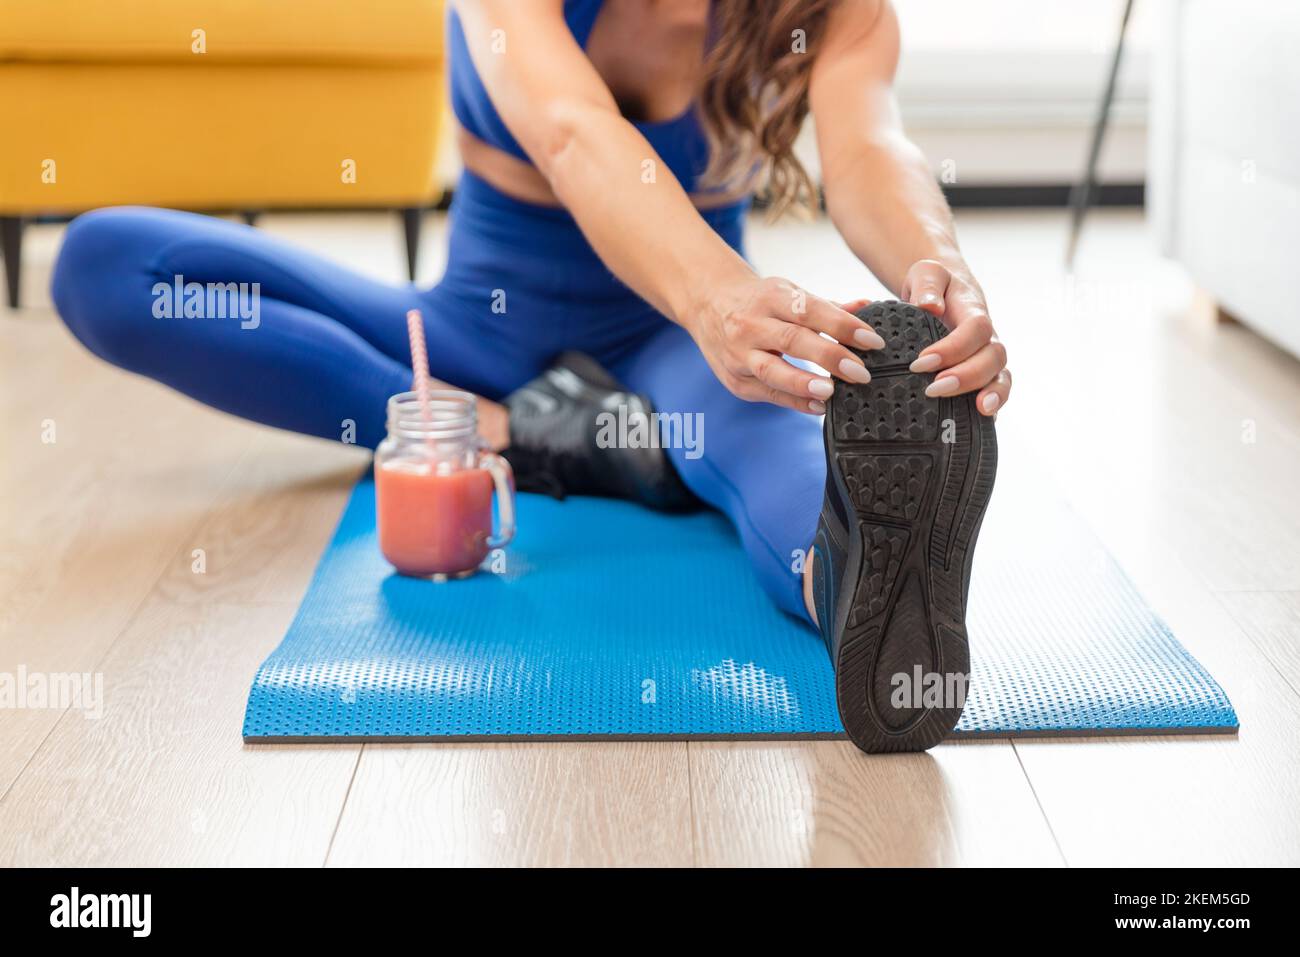 Woman exercising at home. Workout, home fitness concept with online tutorials Stock Photo